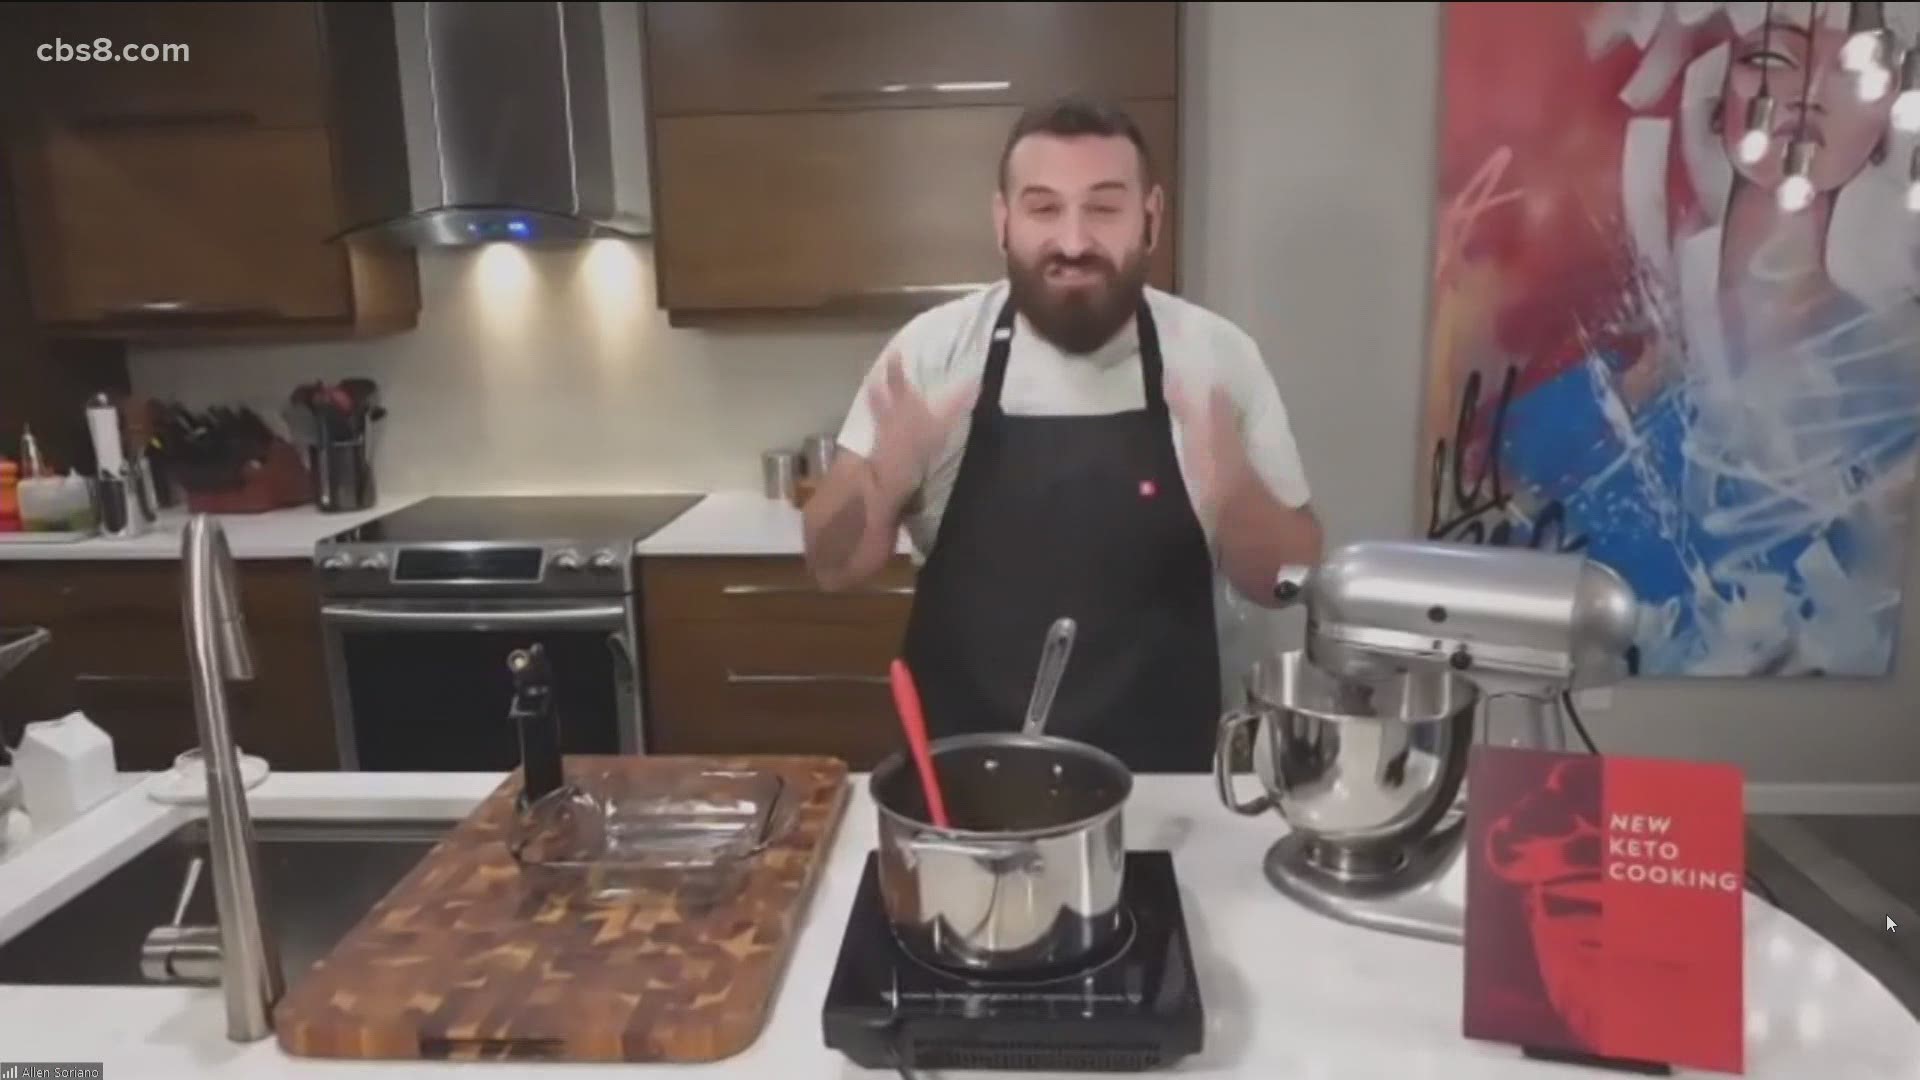 Chef Michael Silverstein joined Morning Extra Tuesday to share some 'Ketogiving' tips.